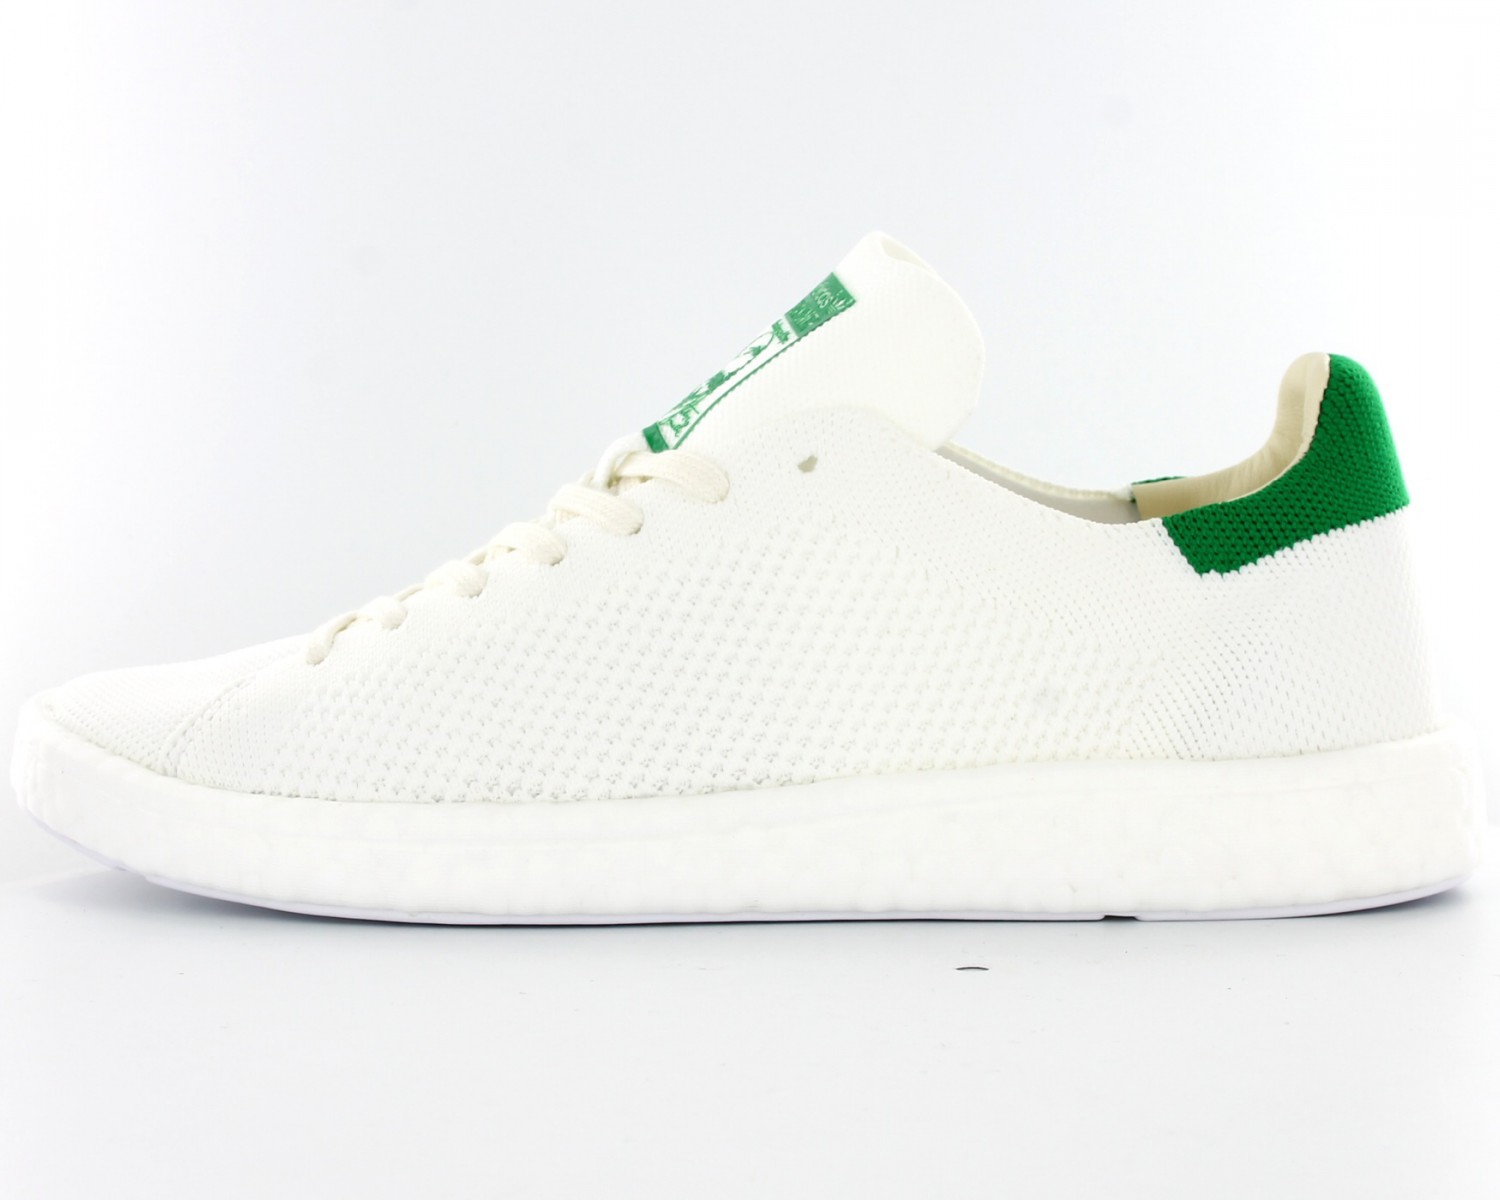 stan smith knit boost